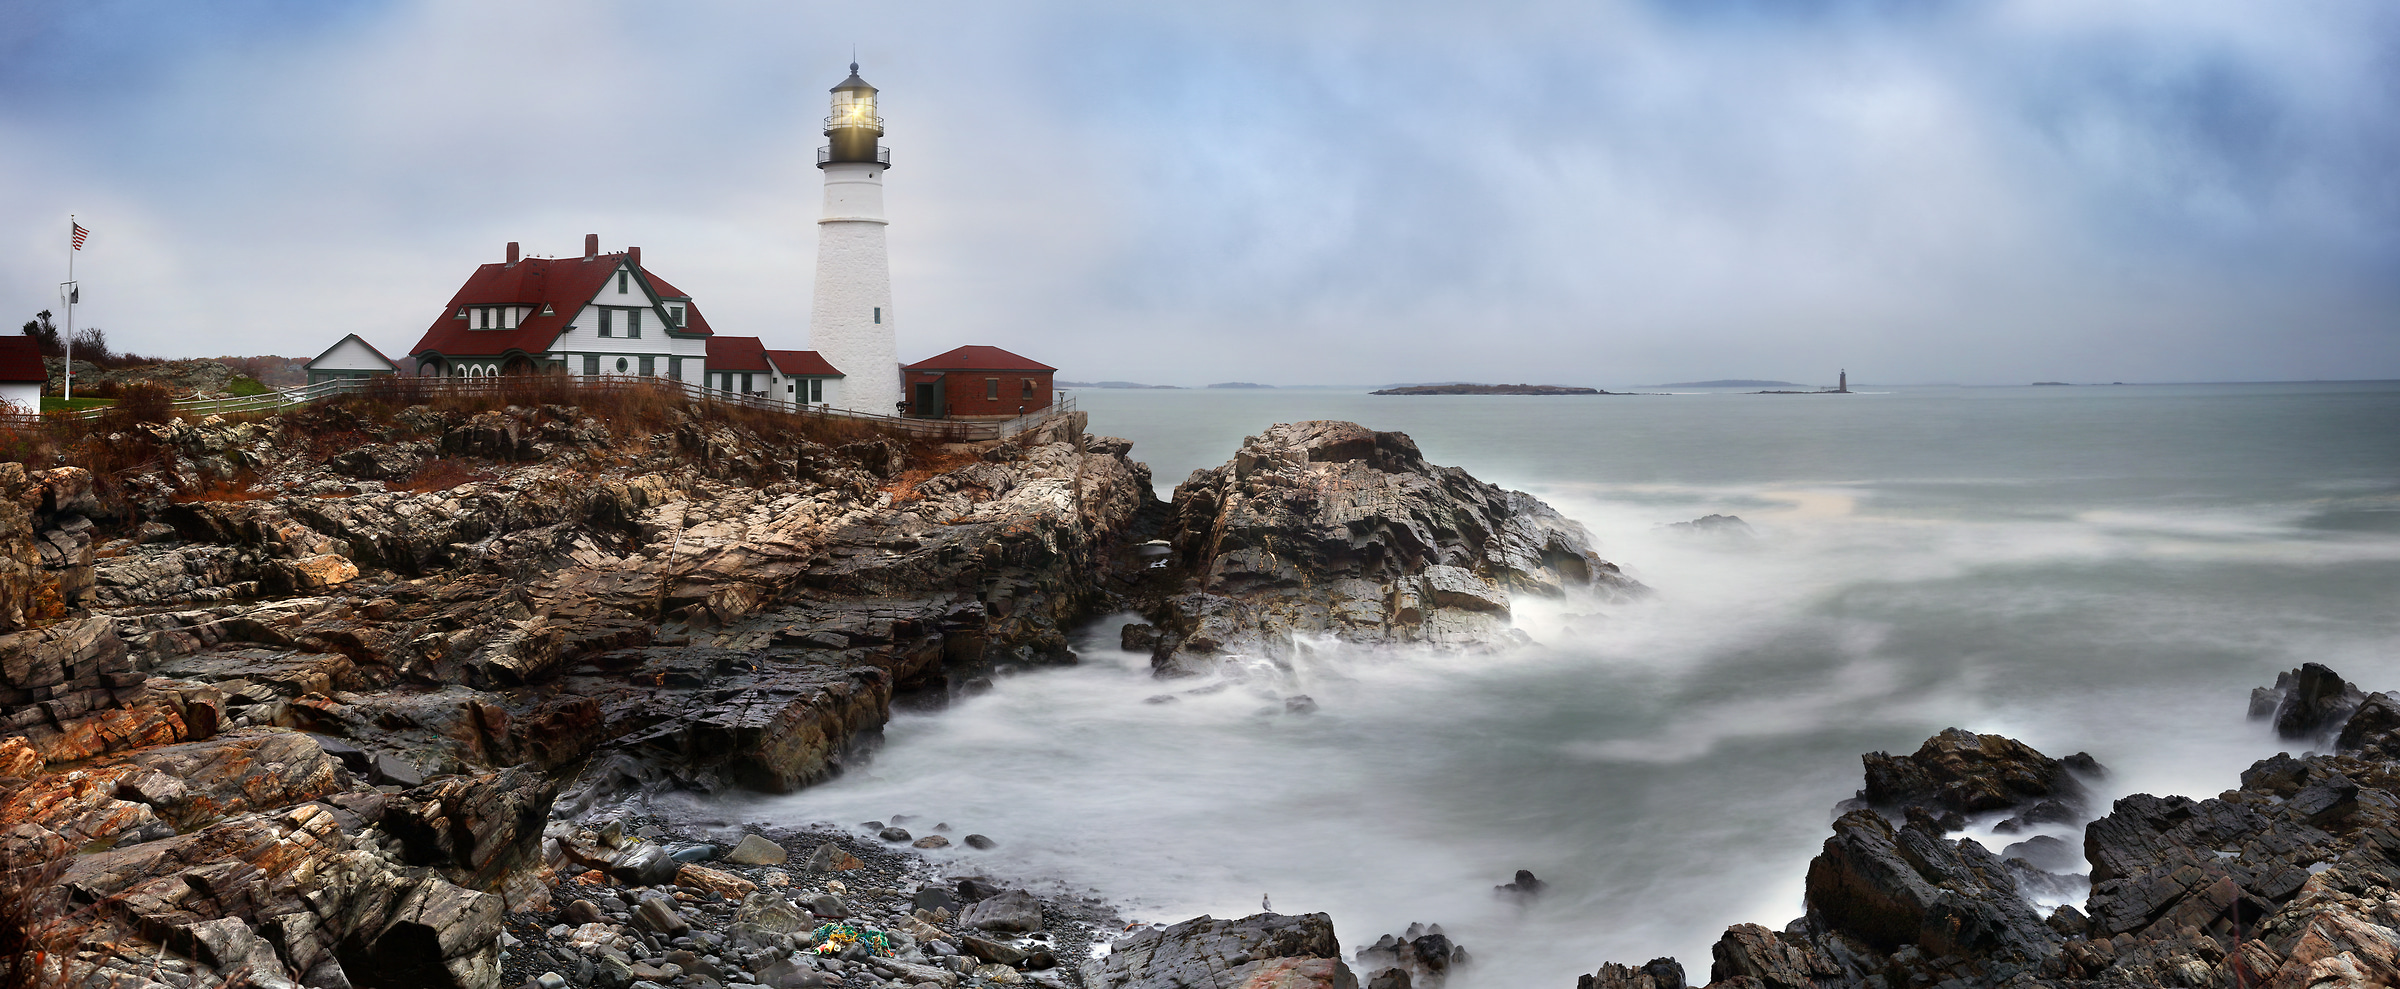 521 megapixels! A very high resolution, large-format VAST photo print of a lighthouse with the ocean and rocks; photograph created by Phil Crawshay in Portland Head Lighthouse, Portland, Maine